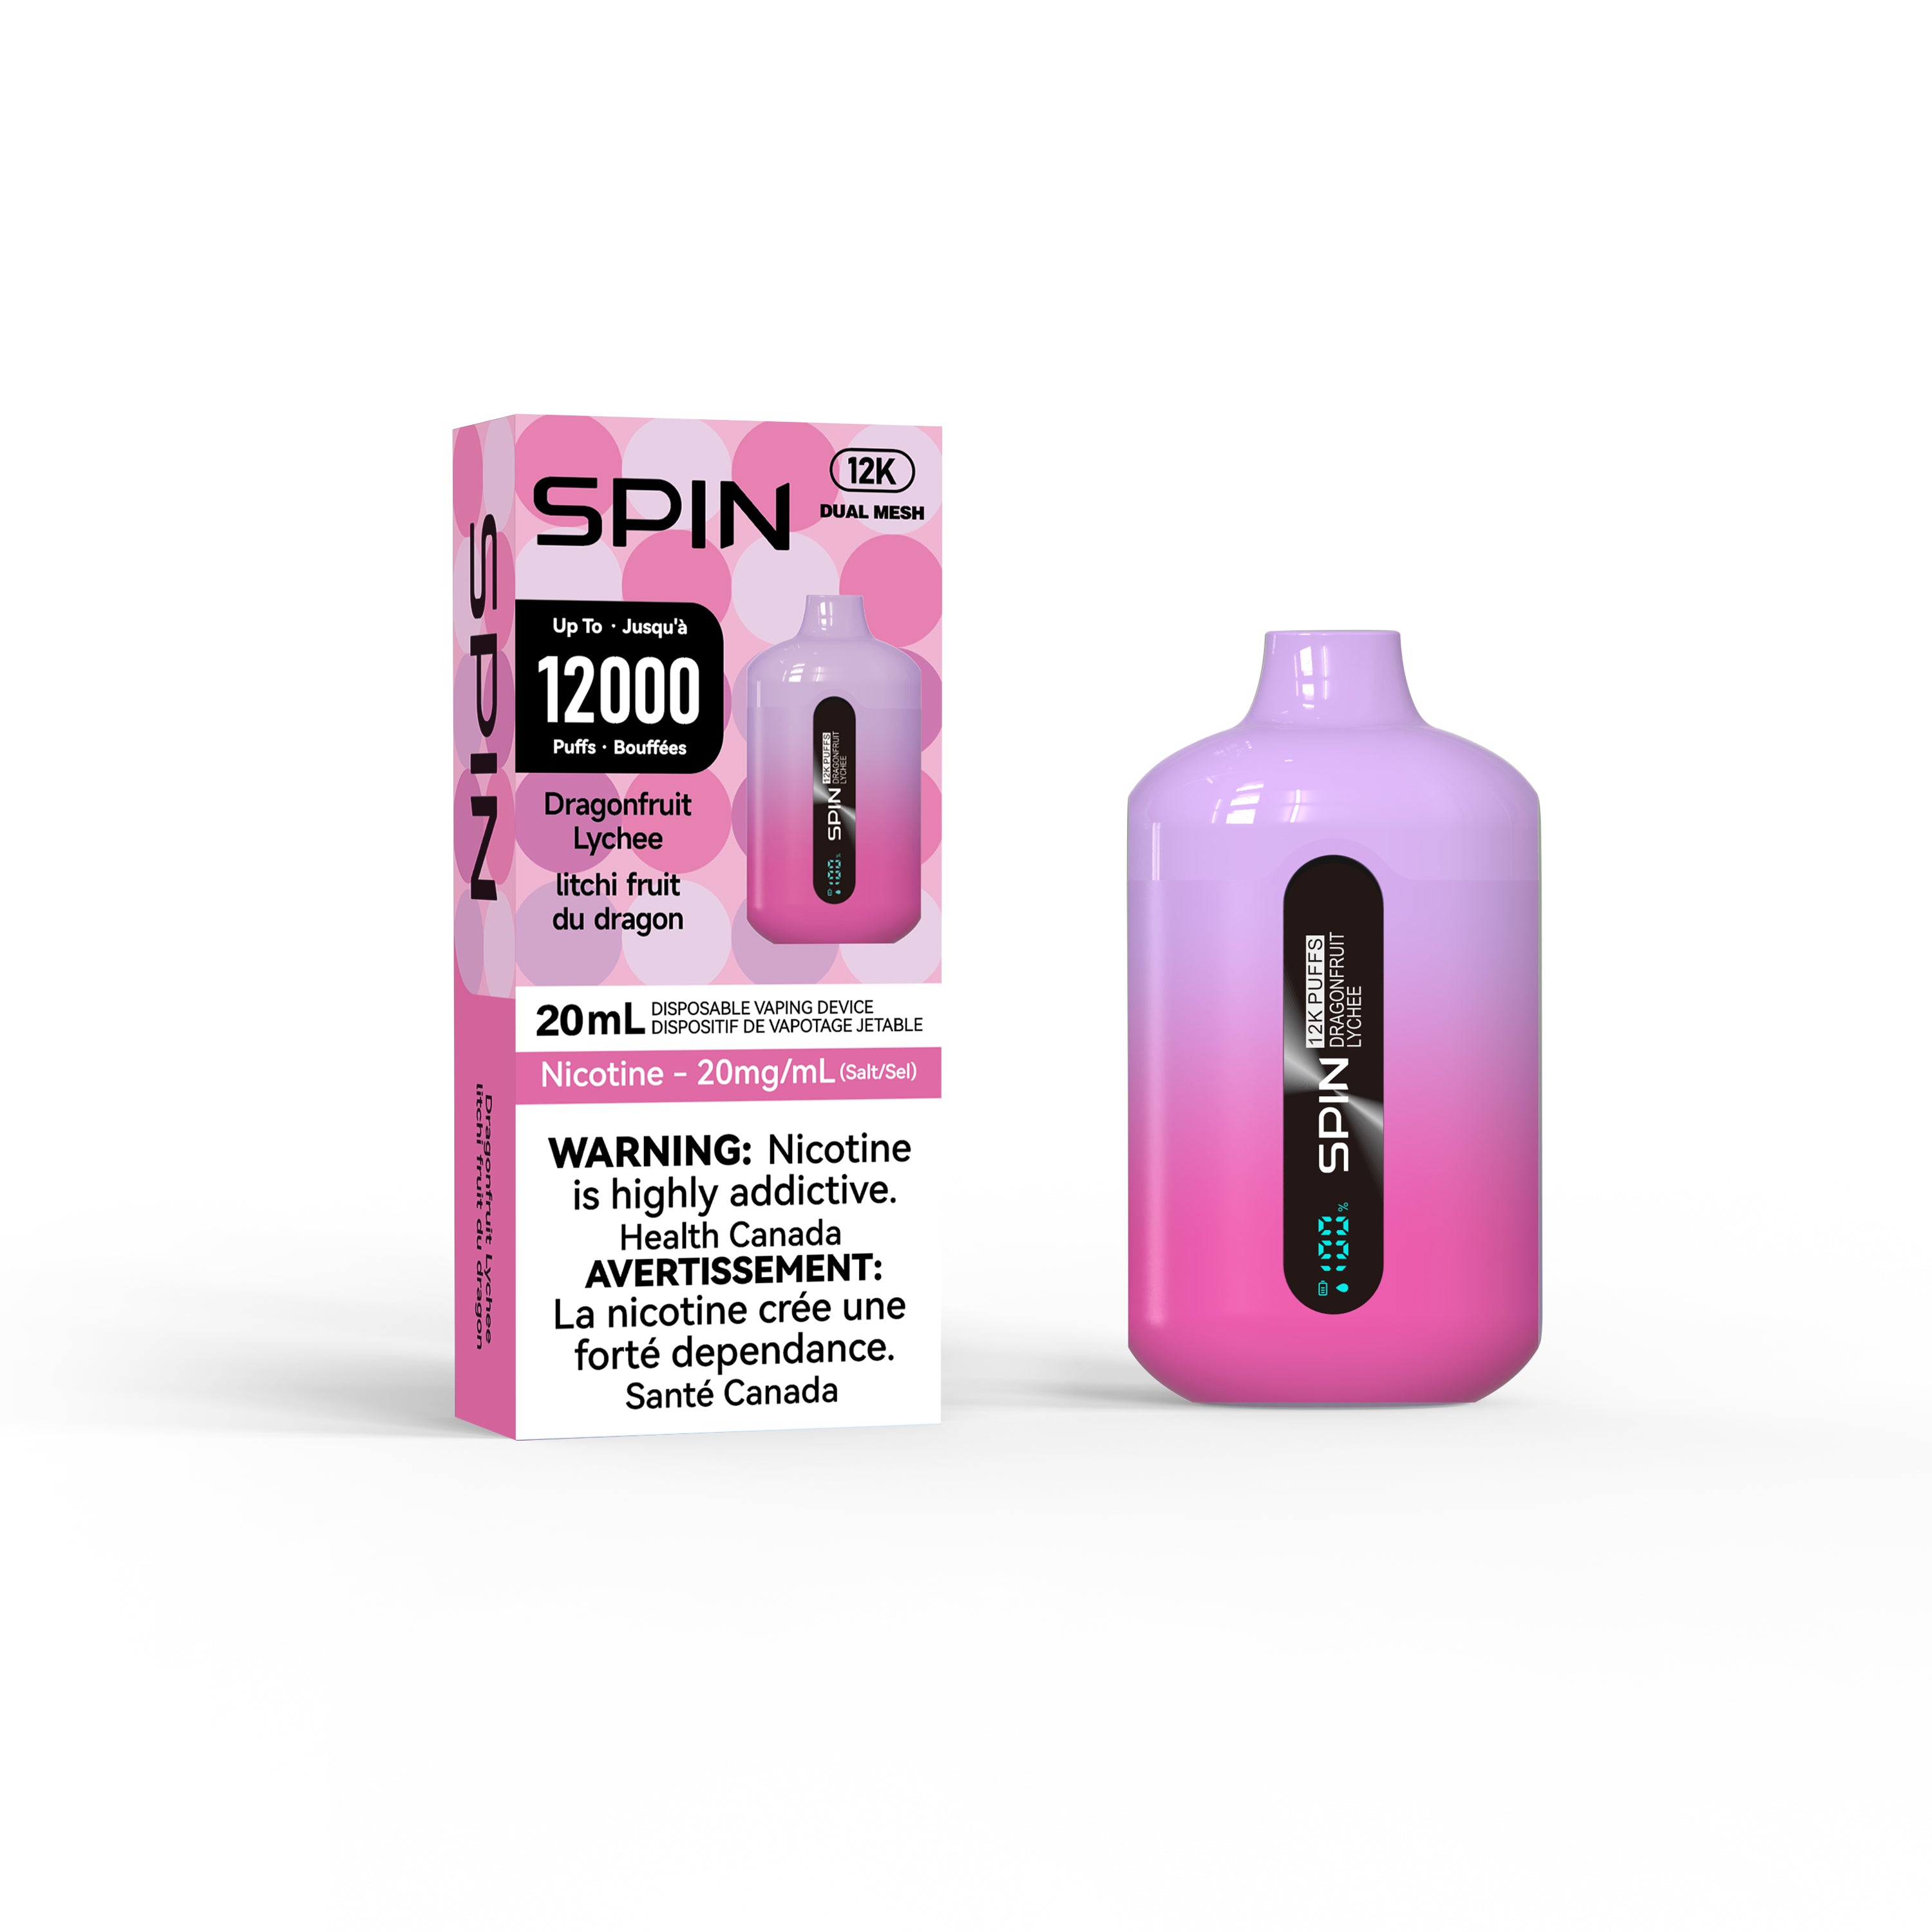 Spin 12K - Up to 12000 Puffs - Dragonfruit Lychee